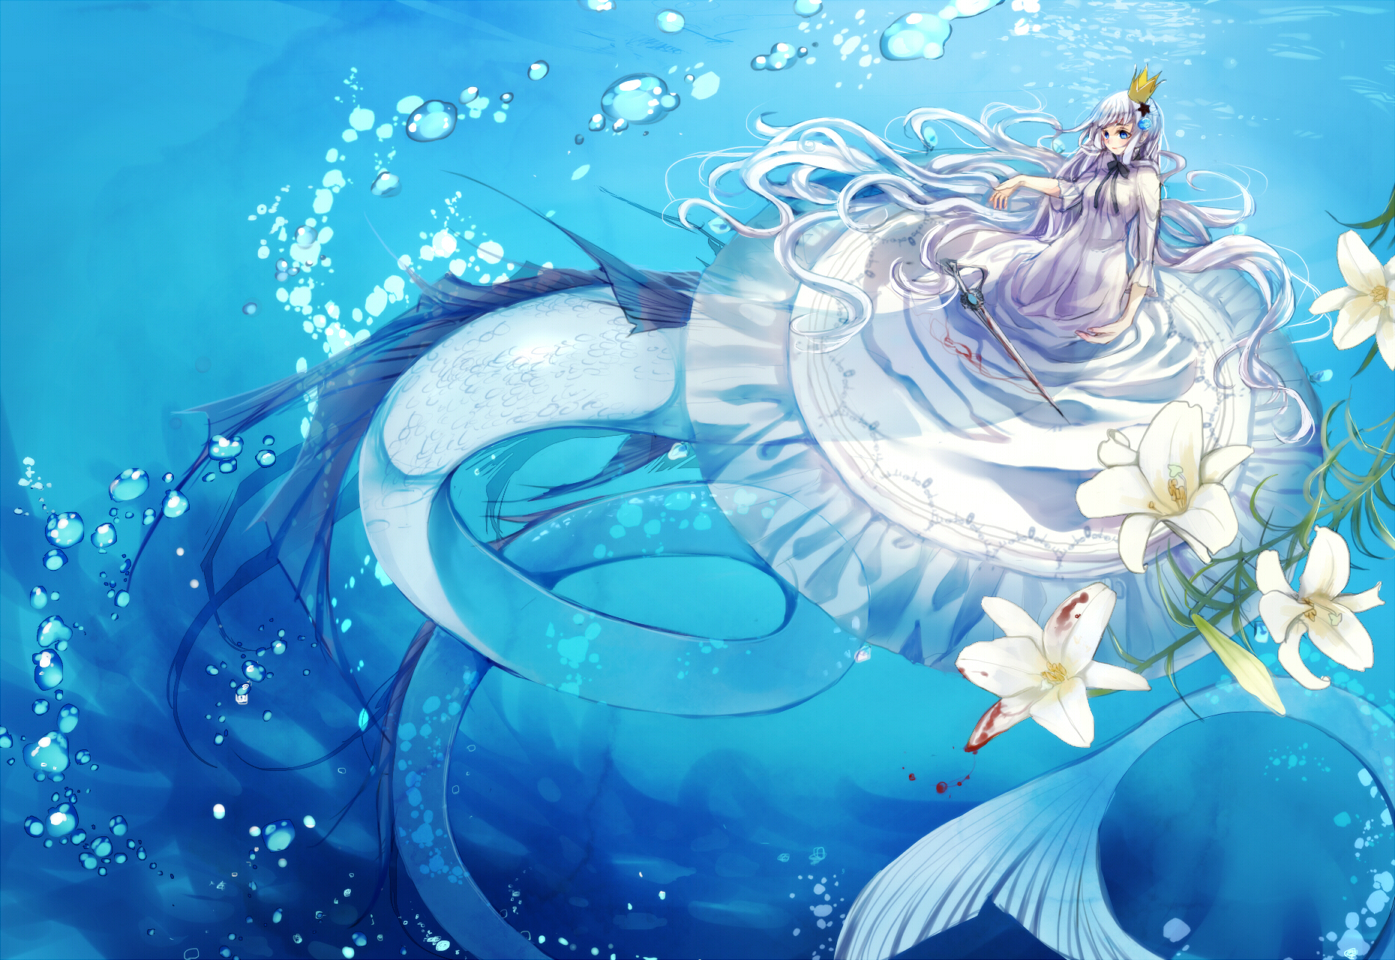 Anime 1395x960 anime anime girls water flowers bubbles tail mermaids long hair dress underwater blood crown weapon